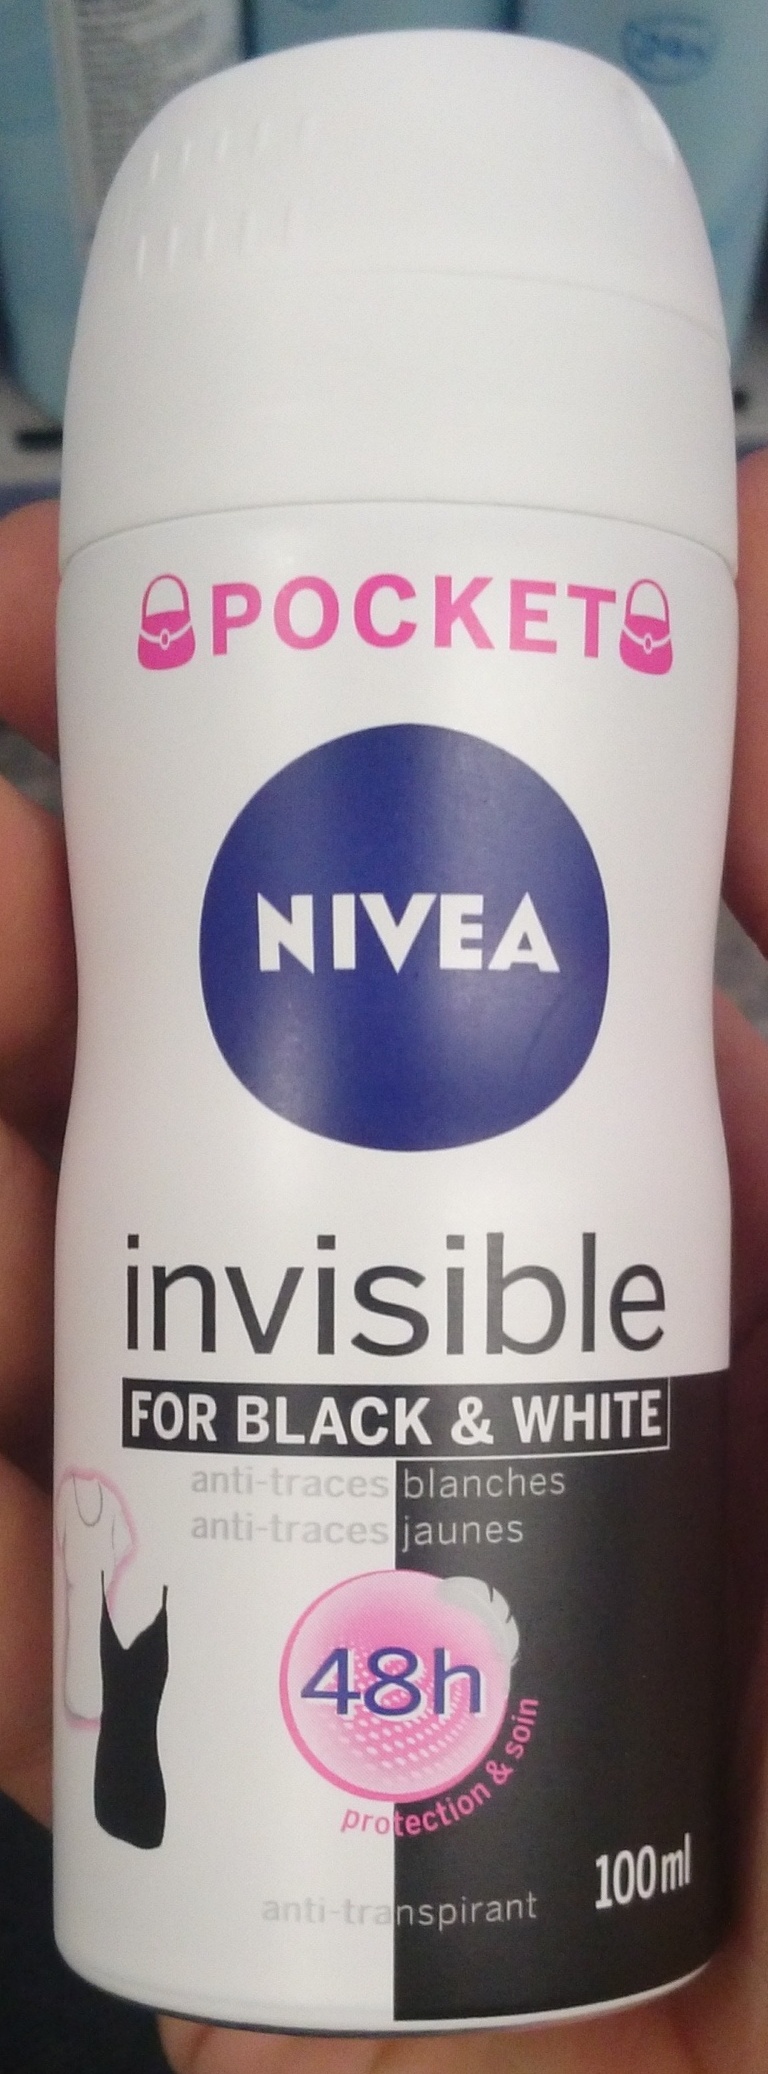 Pocket Invisible for black & white - Product - fr